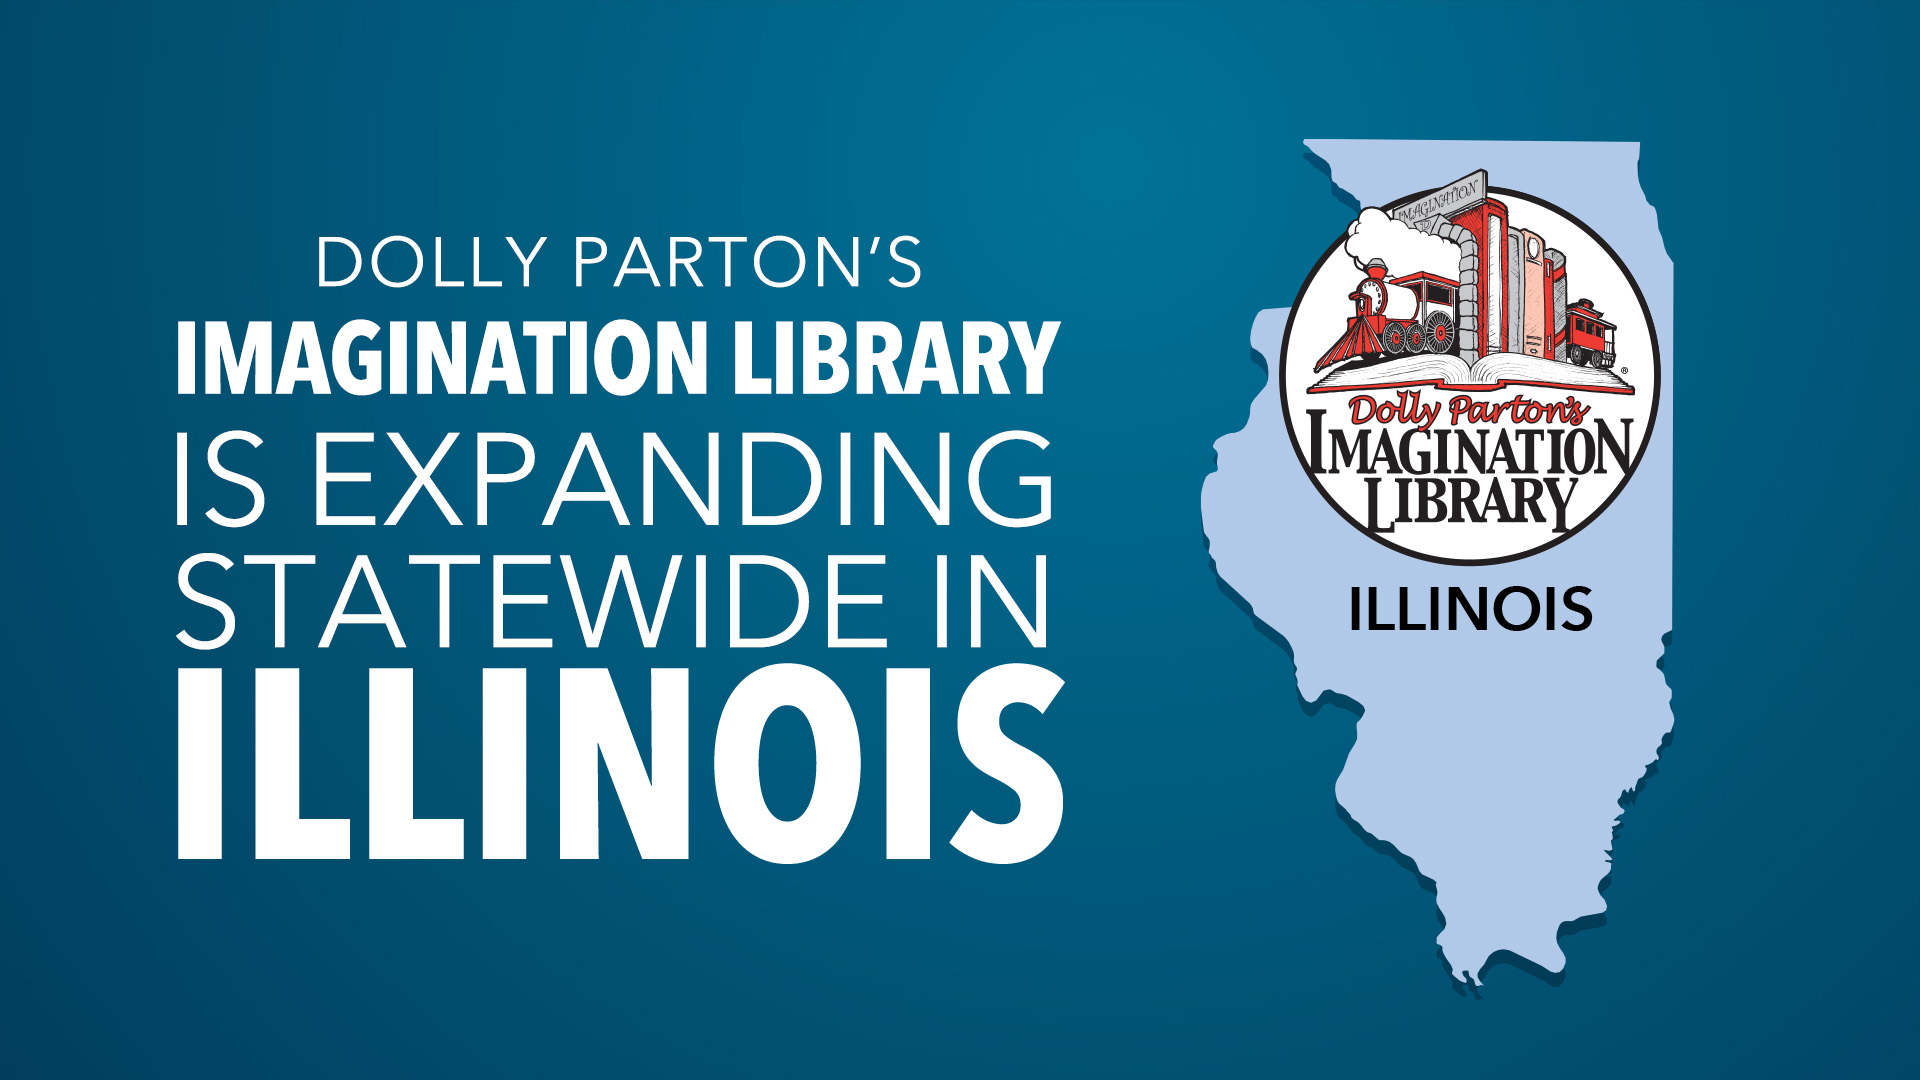 Imagination Library is Expanding Statewide in Illinois